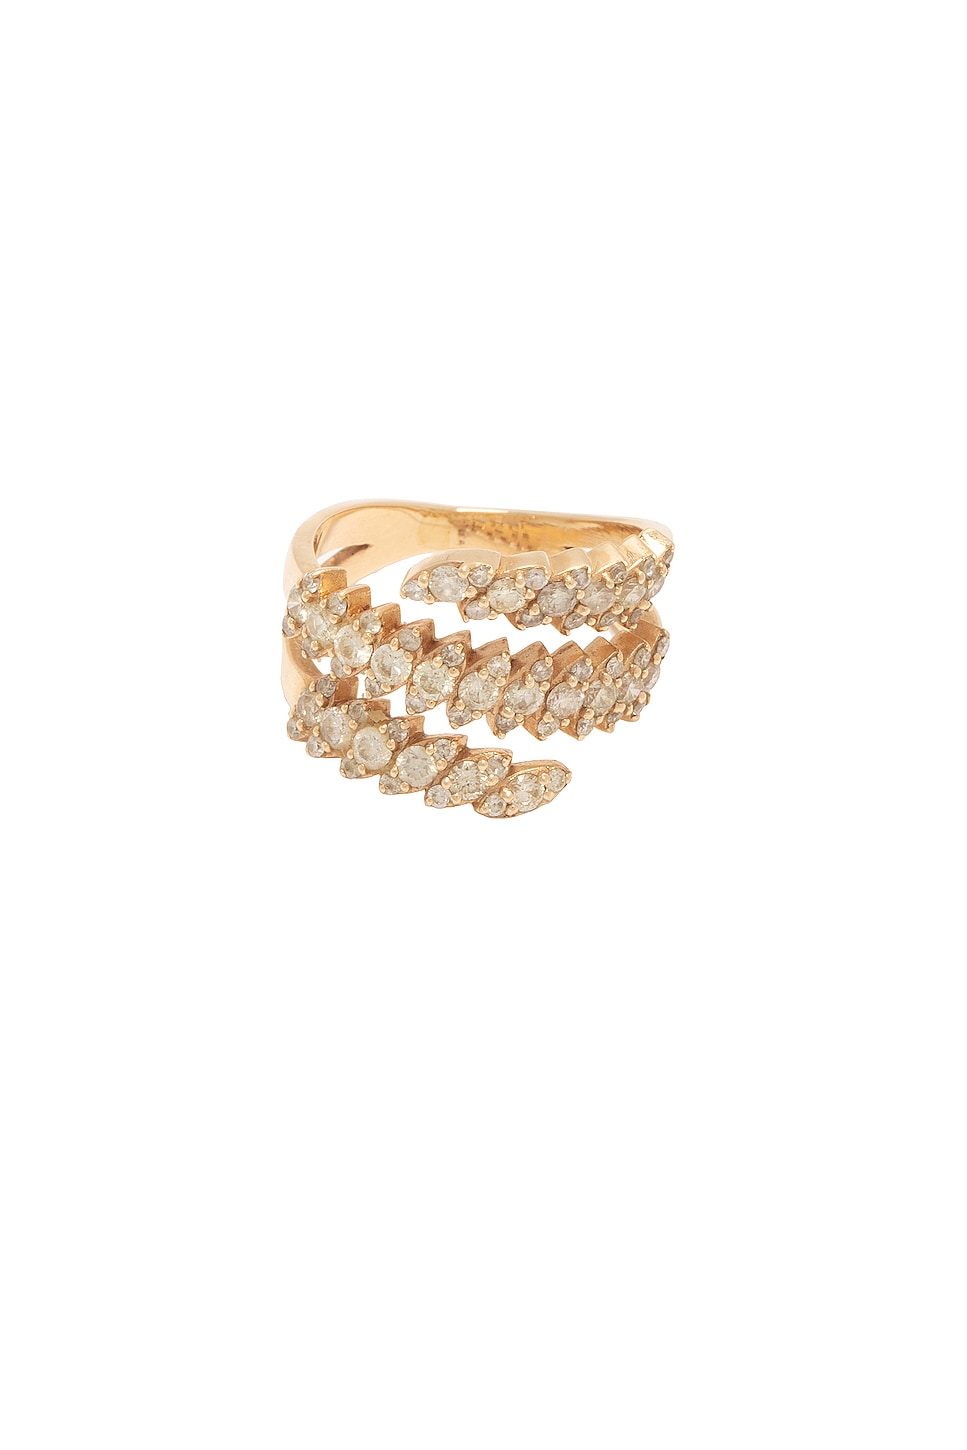 Image 1 of Siena Jewelry Marquis Coil Ring in 14k Yellow Gold & Diamond